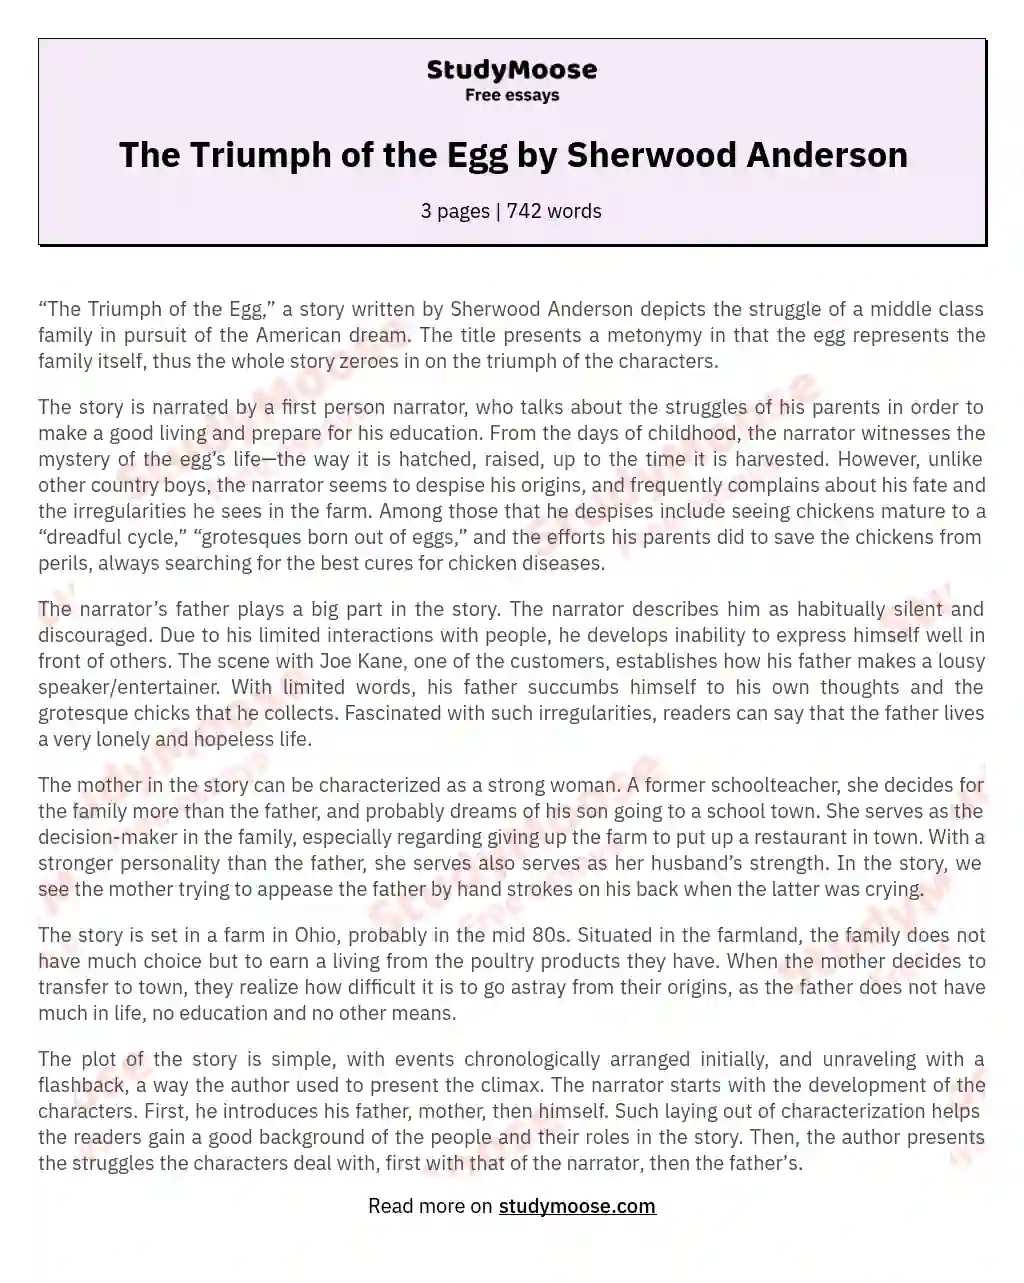 The Triumph of the Egg by Sherwood Anderson essay